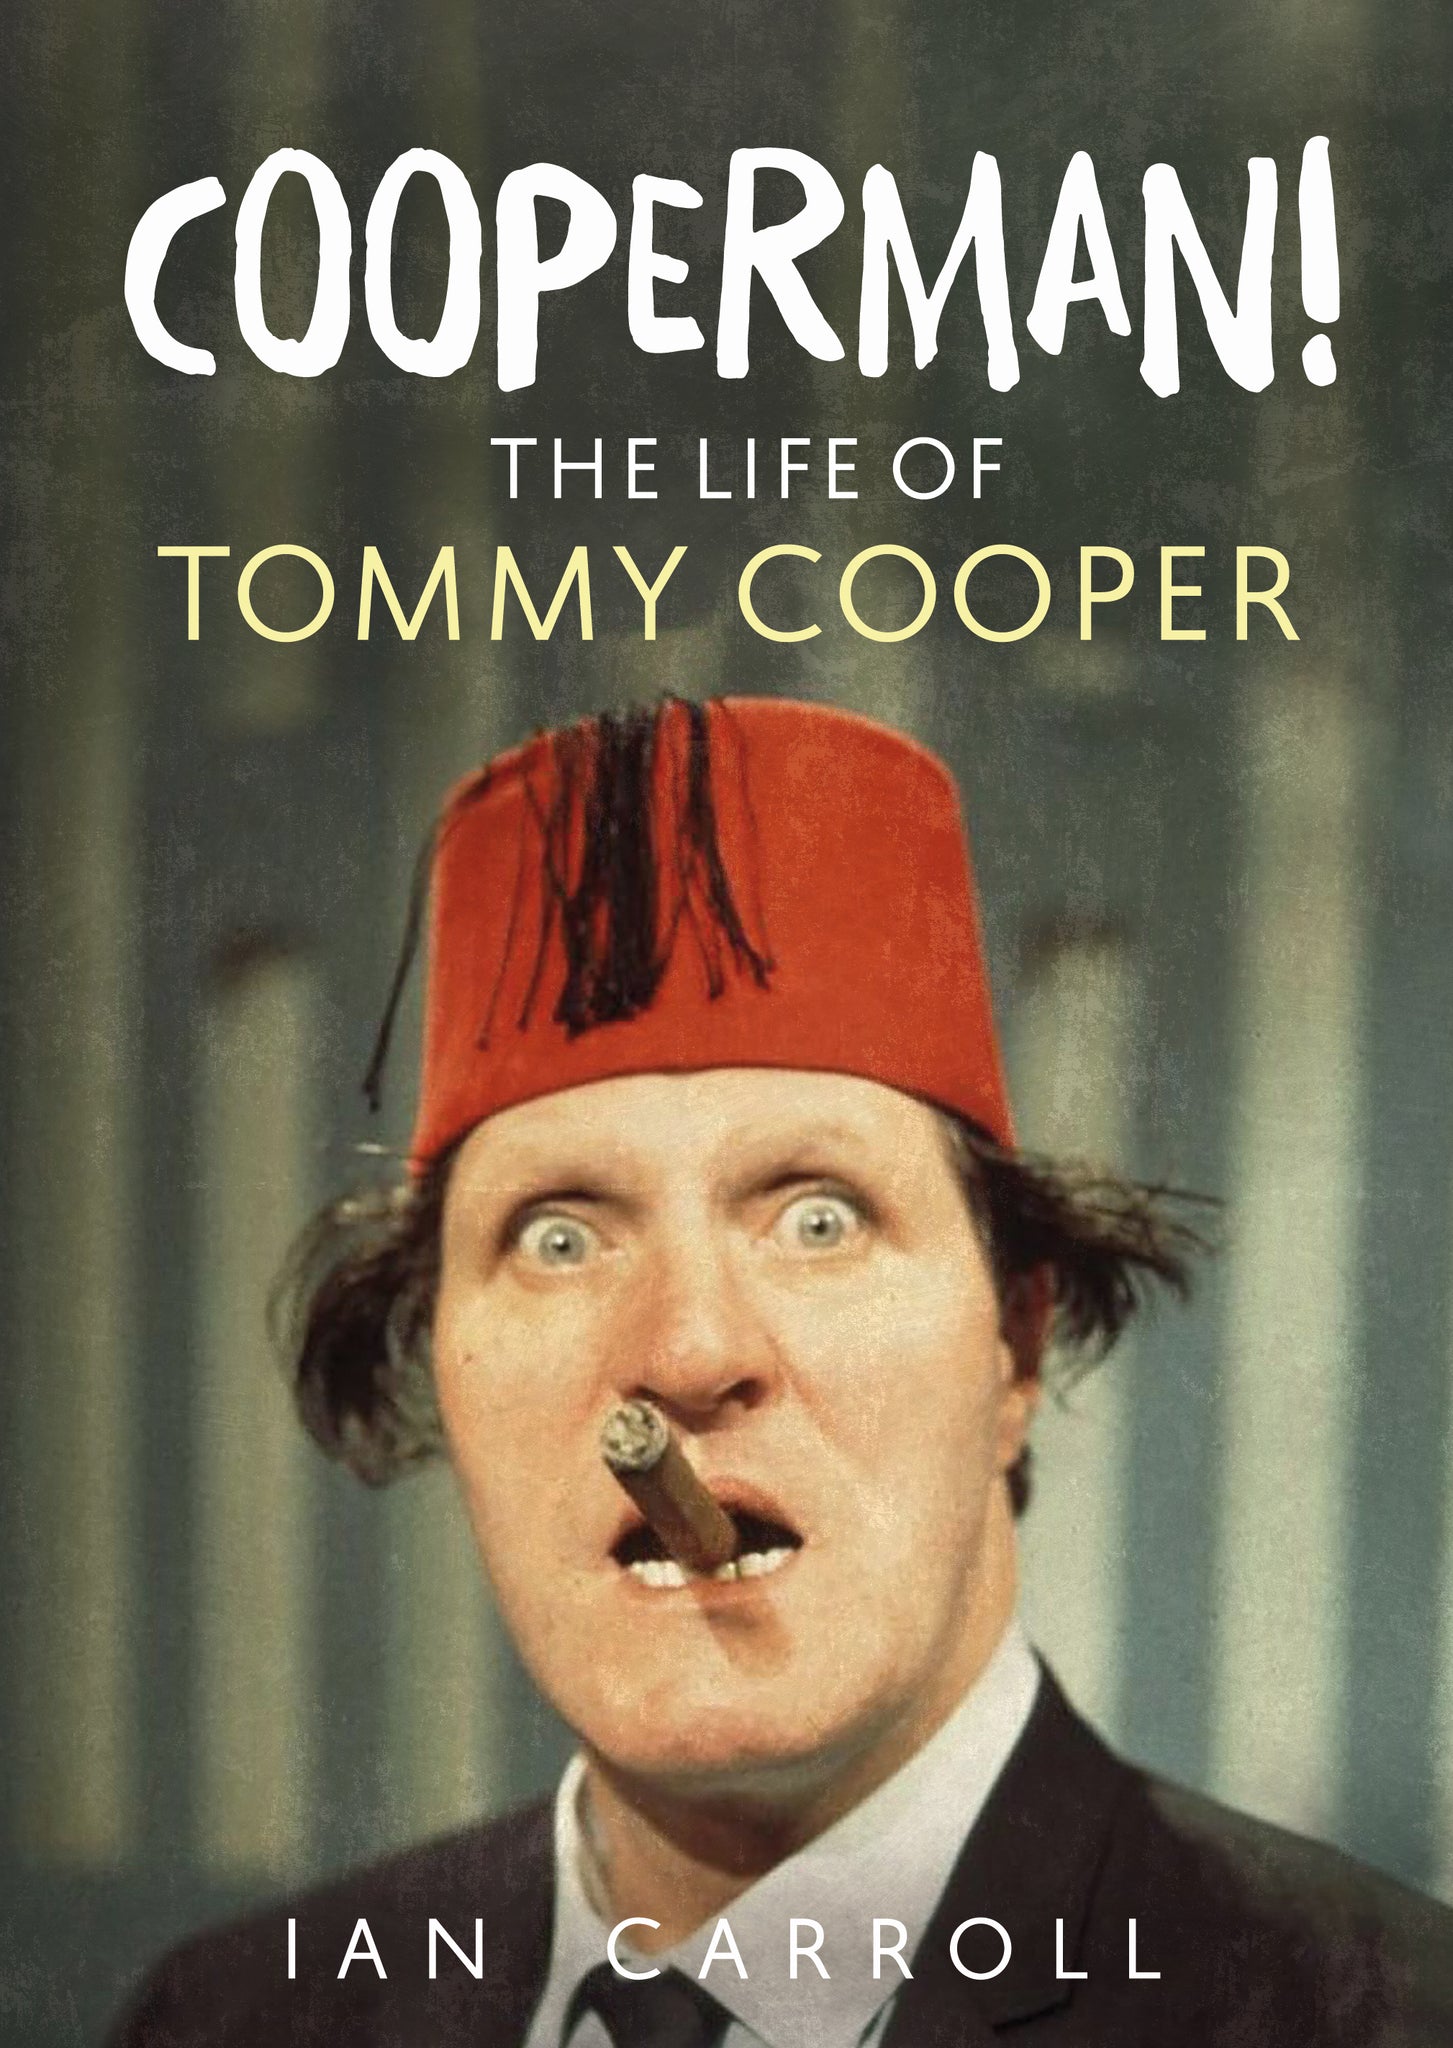 Cooperman! The Life of Tommy Cooper - available from Fonthill Media